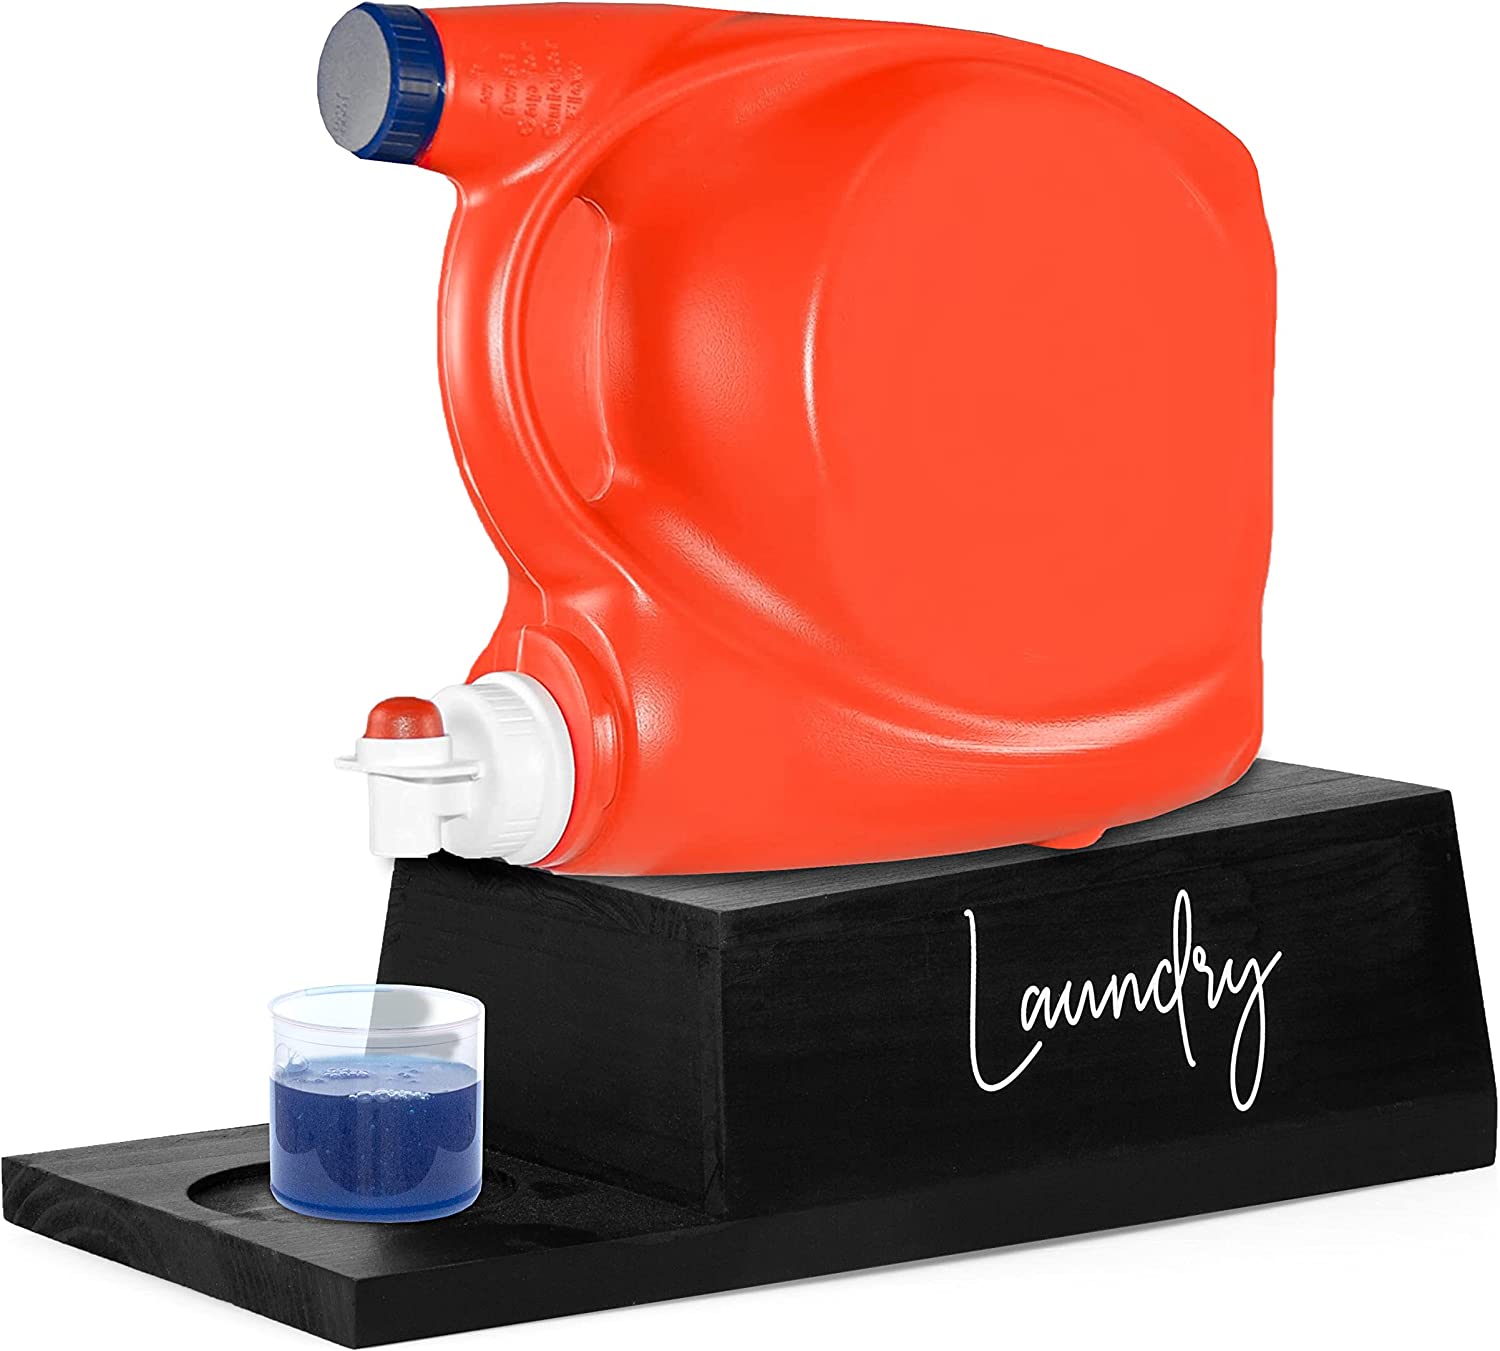 Ilyapa Black Wooden Soap Station - Props Up Laundry Detergent Dispensers, Fabric Softeners